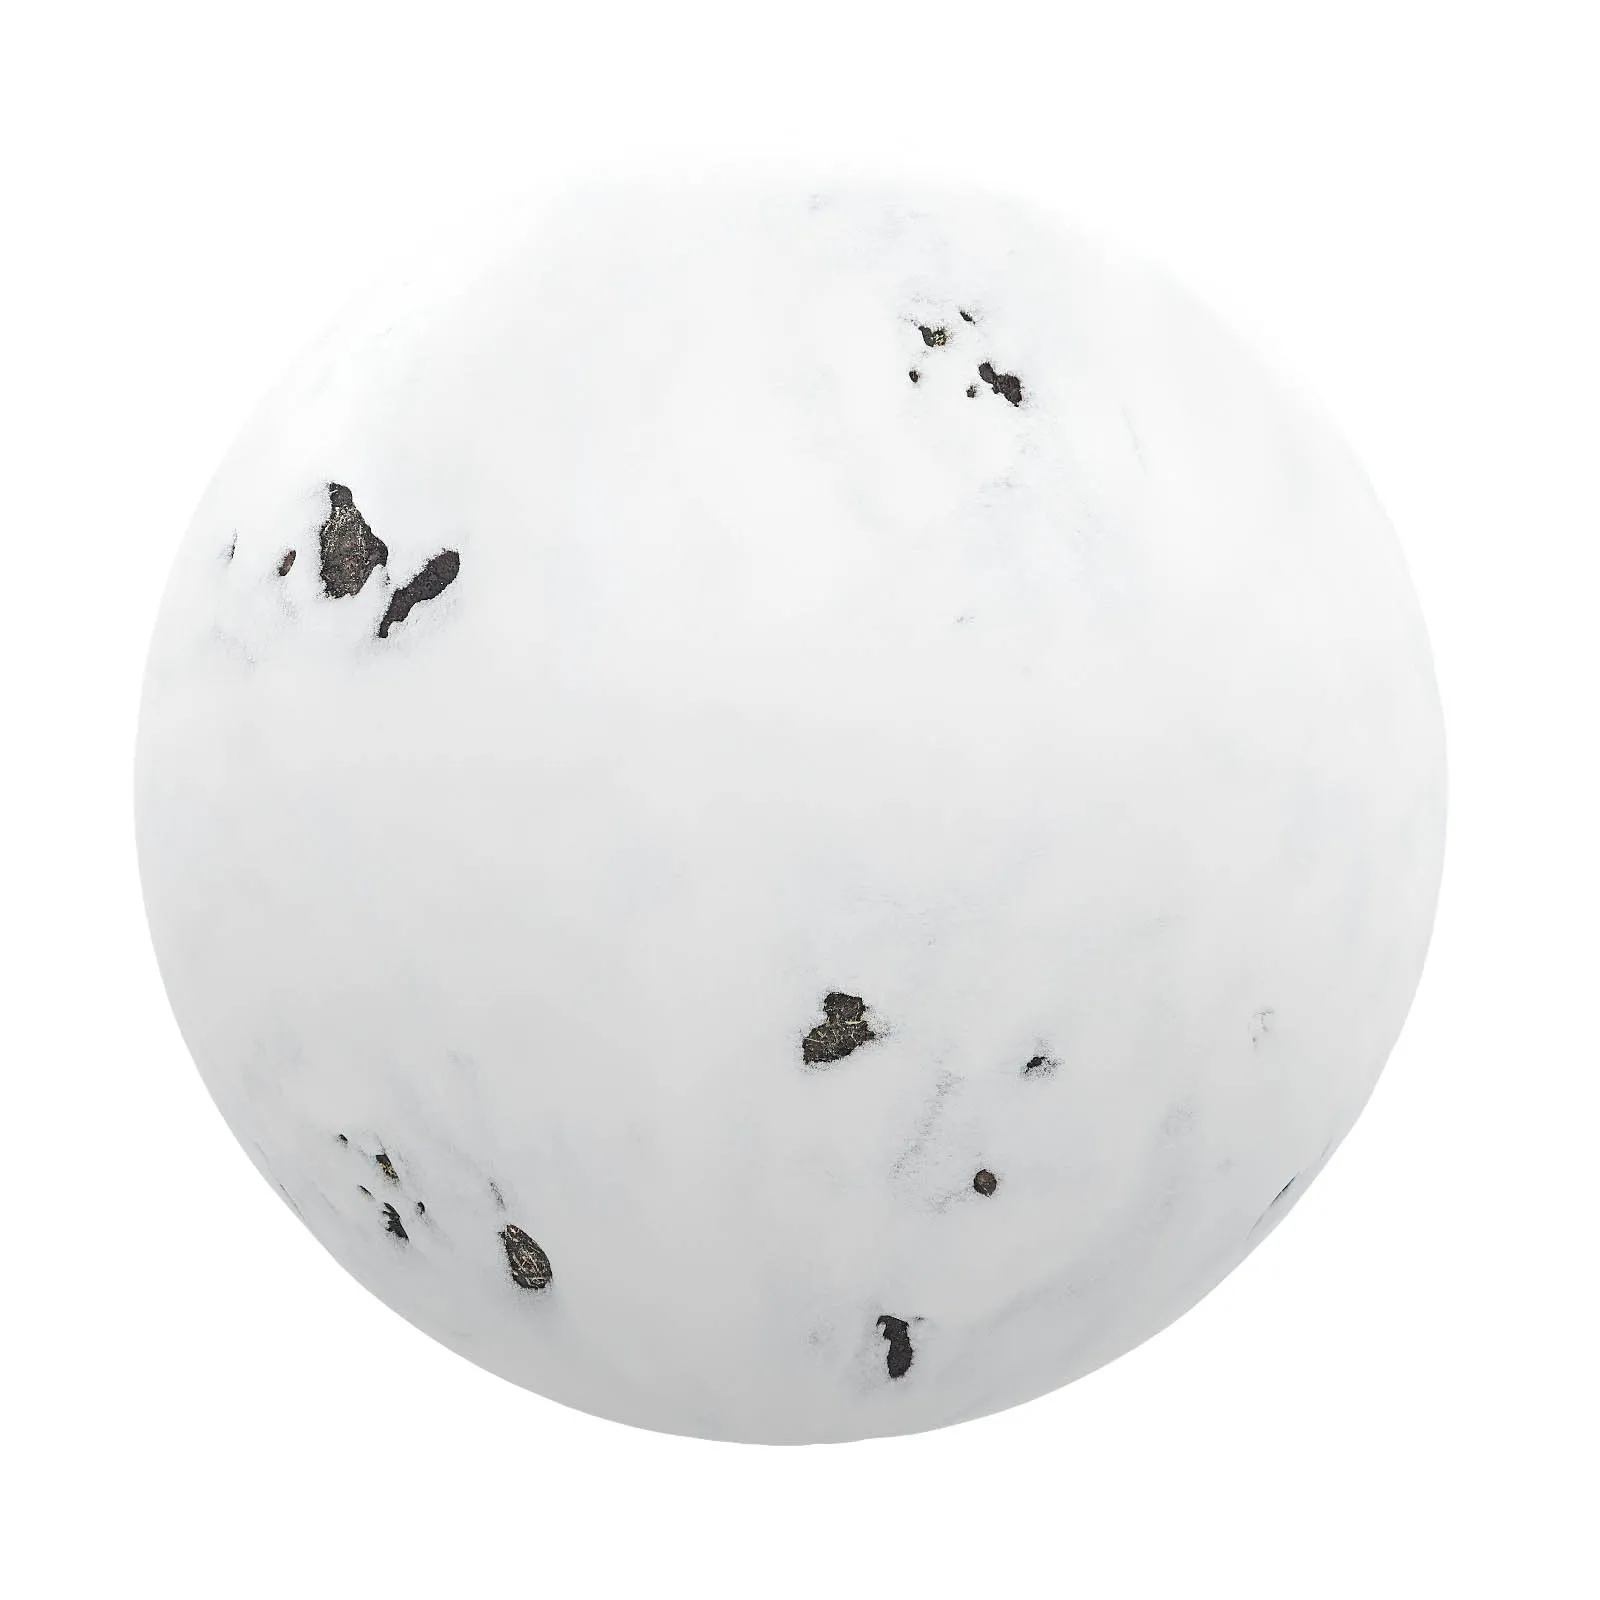 PBR CGAXIS TEXTURES – SNOW – Snow With Ground Spots 1